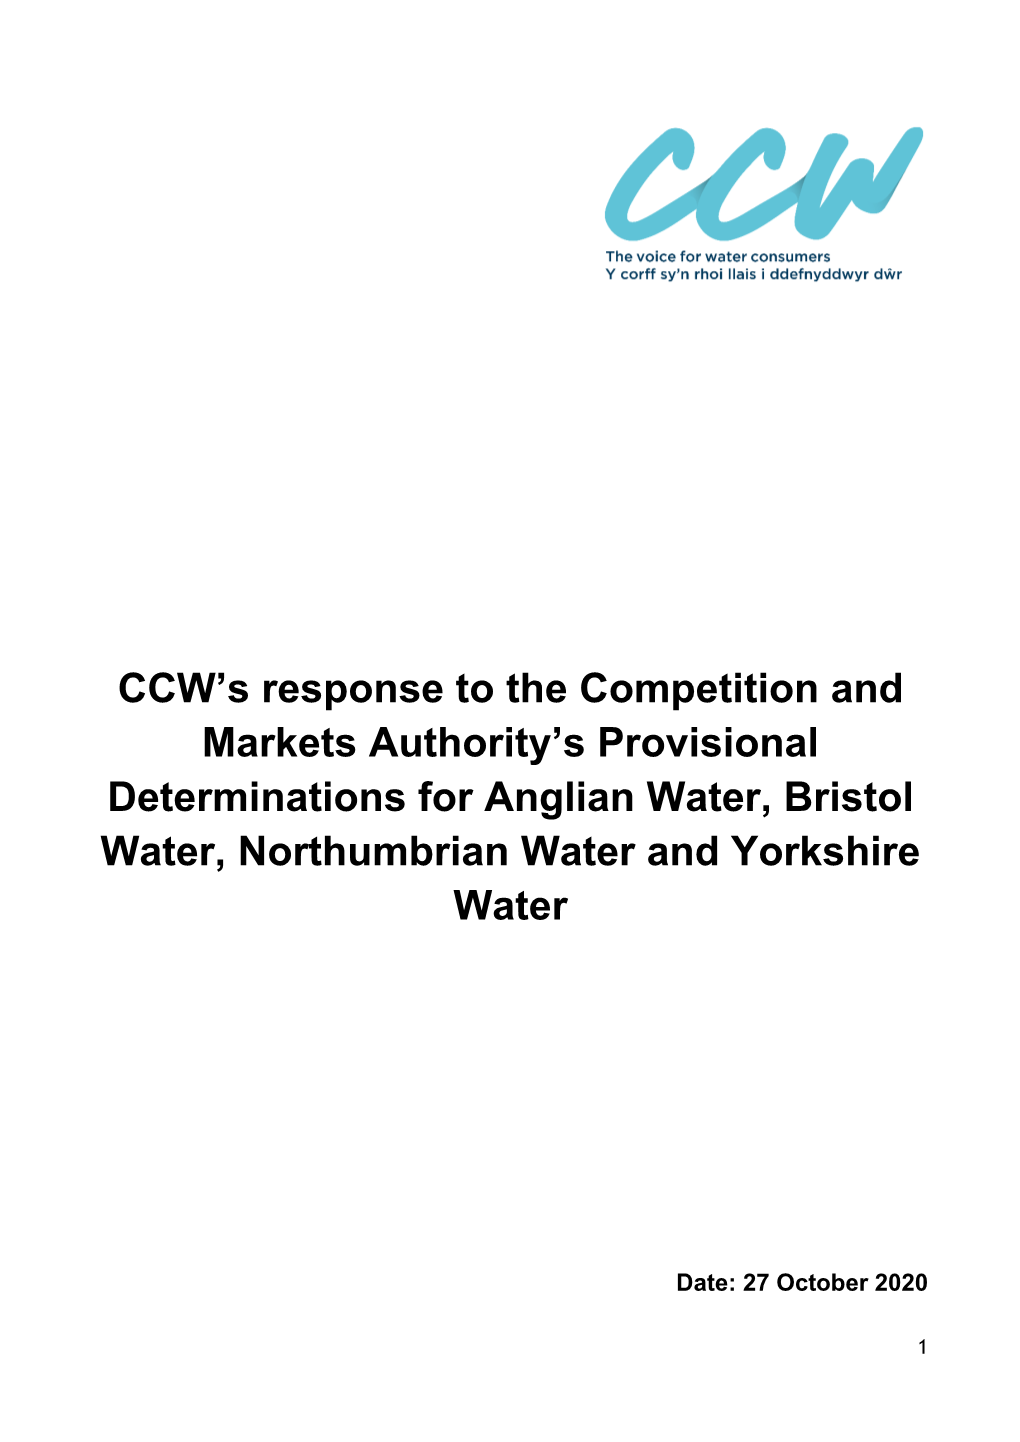 CCW's Response to the Competition and Markets Authority's Provisional Determinations for Anglian Water, Bristol Water, Nort